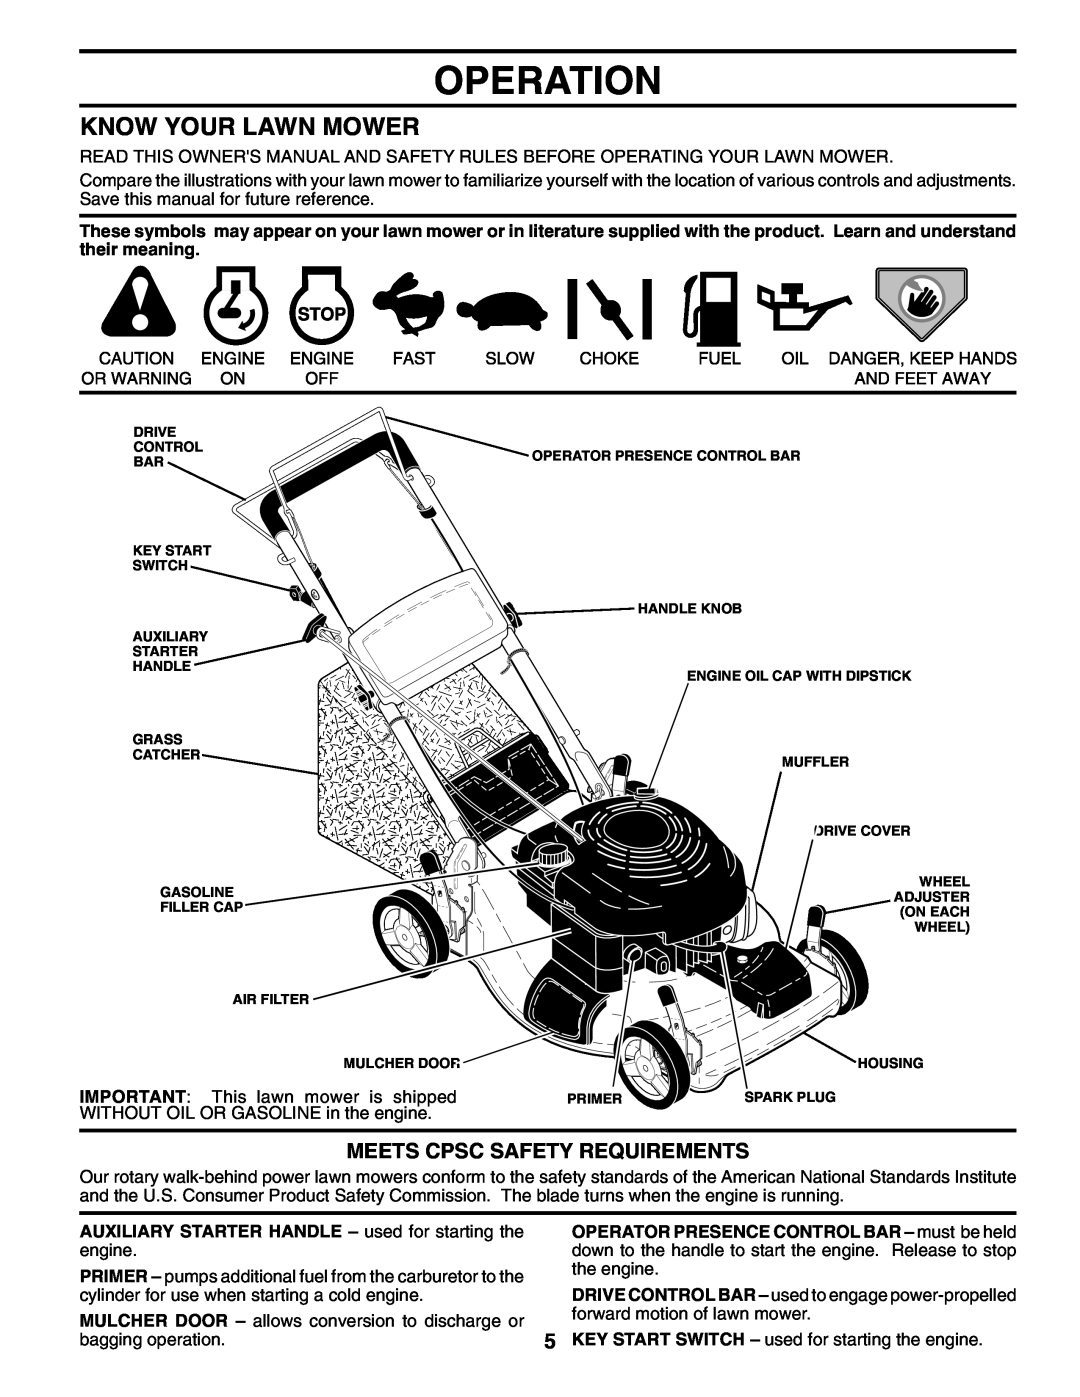 Husqvarna 65022ES owner manual Operation, Know Your Lawn Mower, Meets Cpsc Safety Requirements 